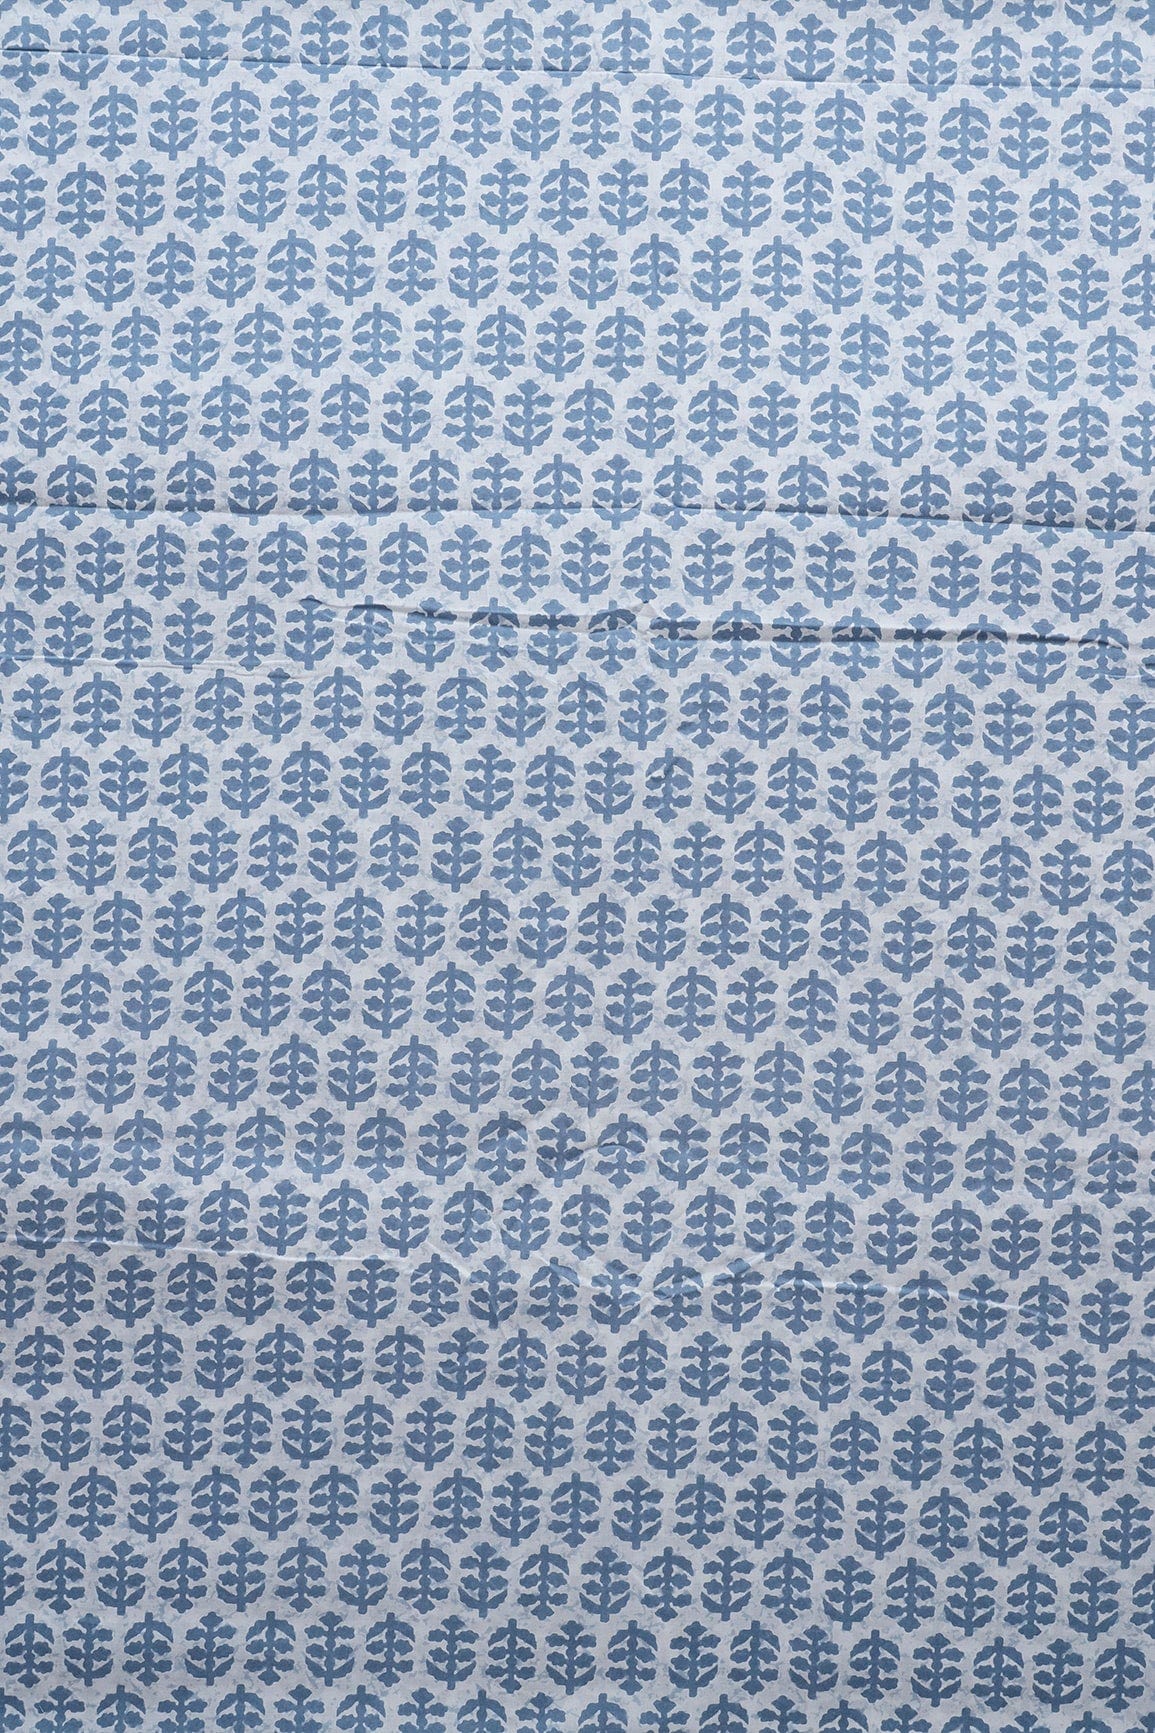 doeraa Prints Pastel Blue And White Floral Print On Pure Cotton Fabric